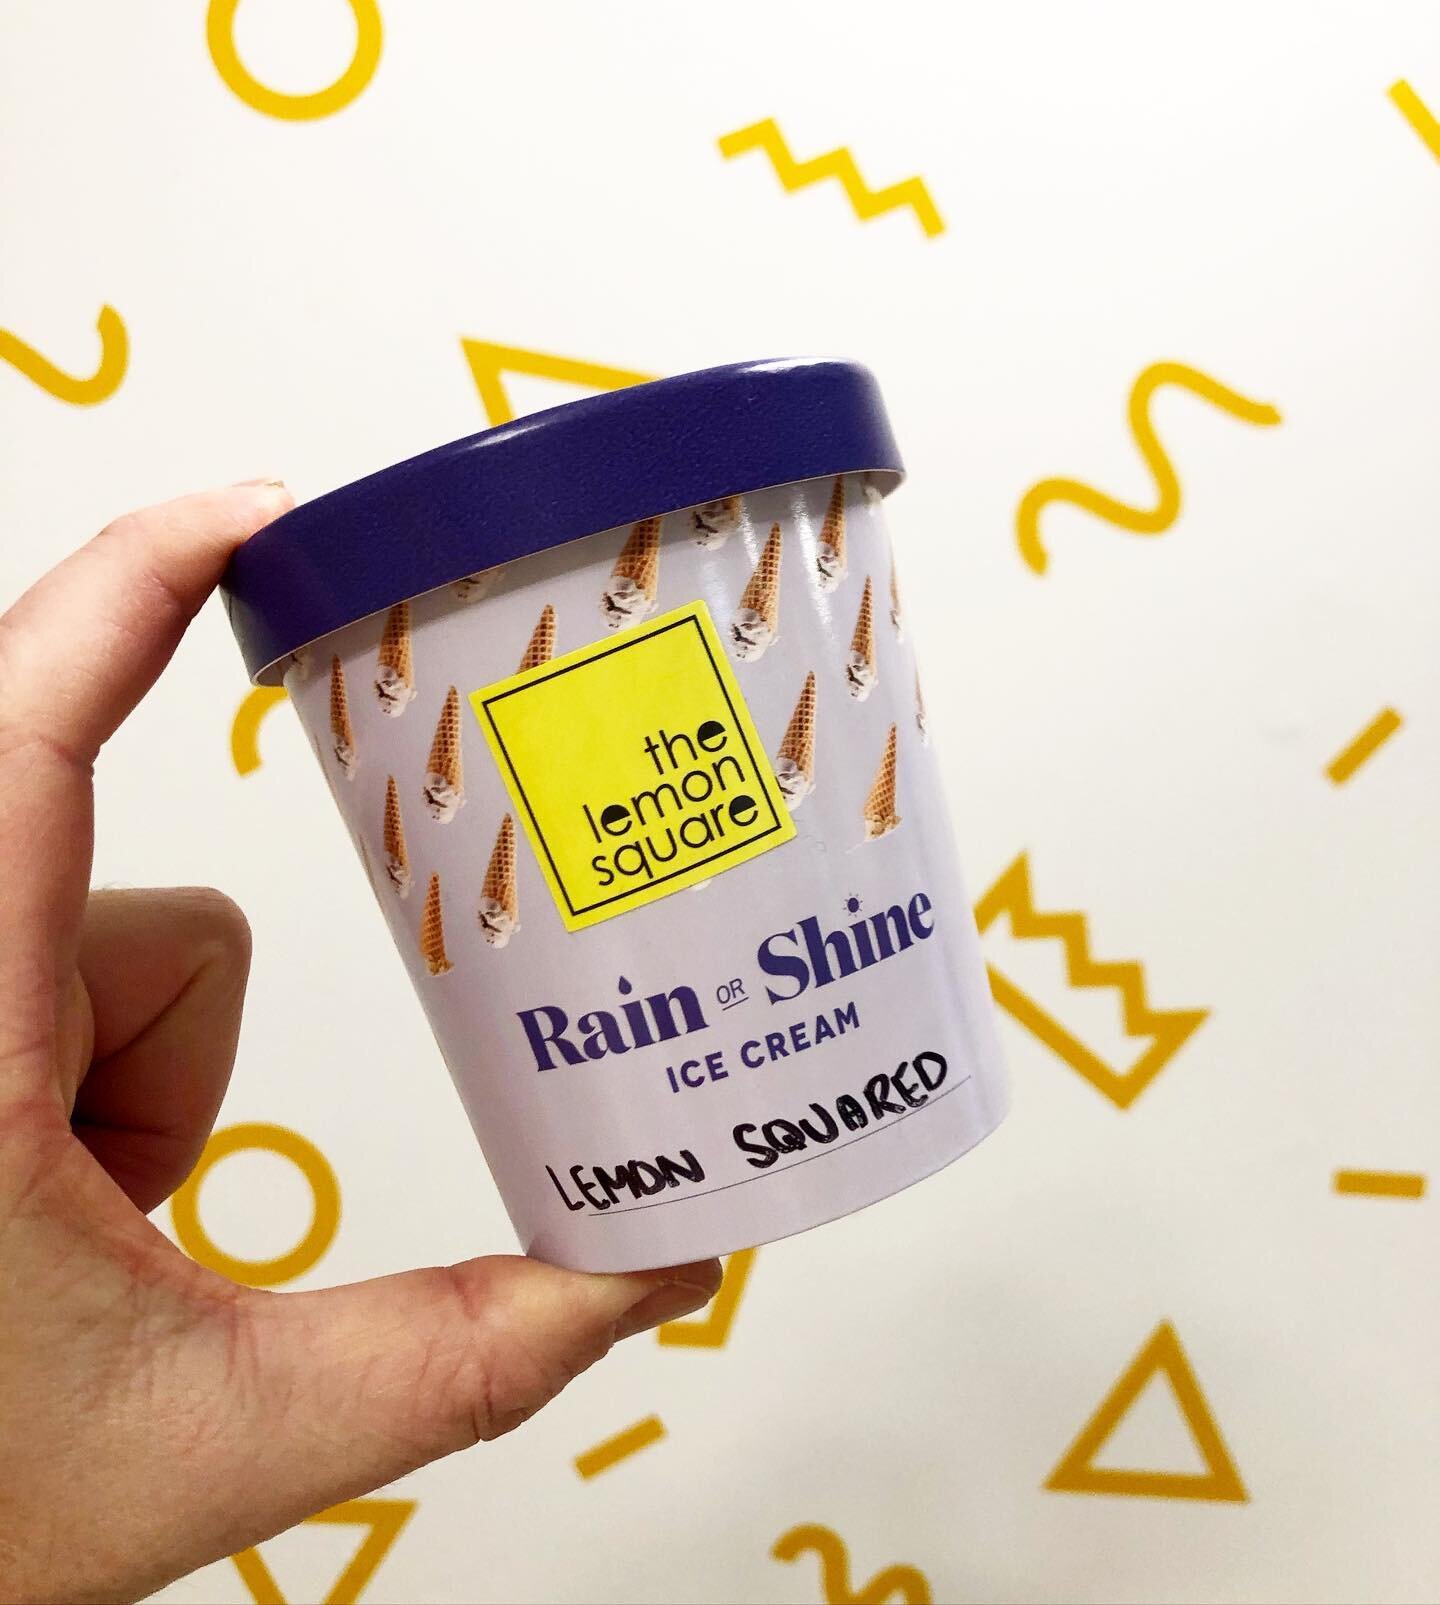 Ice Cream is back in stock at the #gastown store 🍋🍋🍋 Store open from 11-6pm